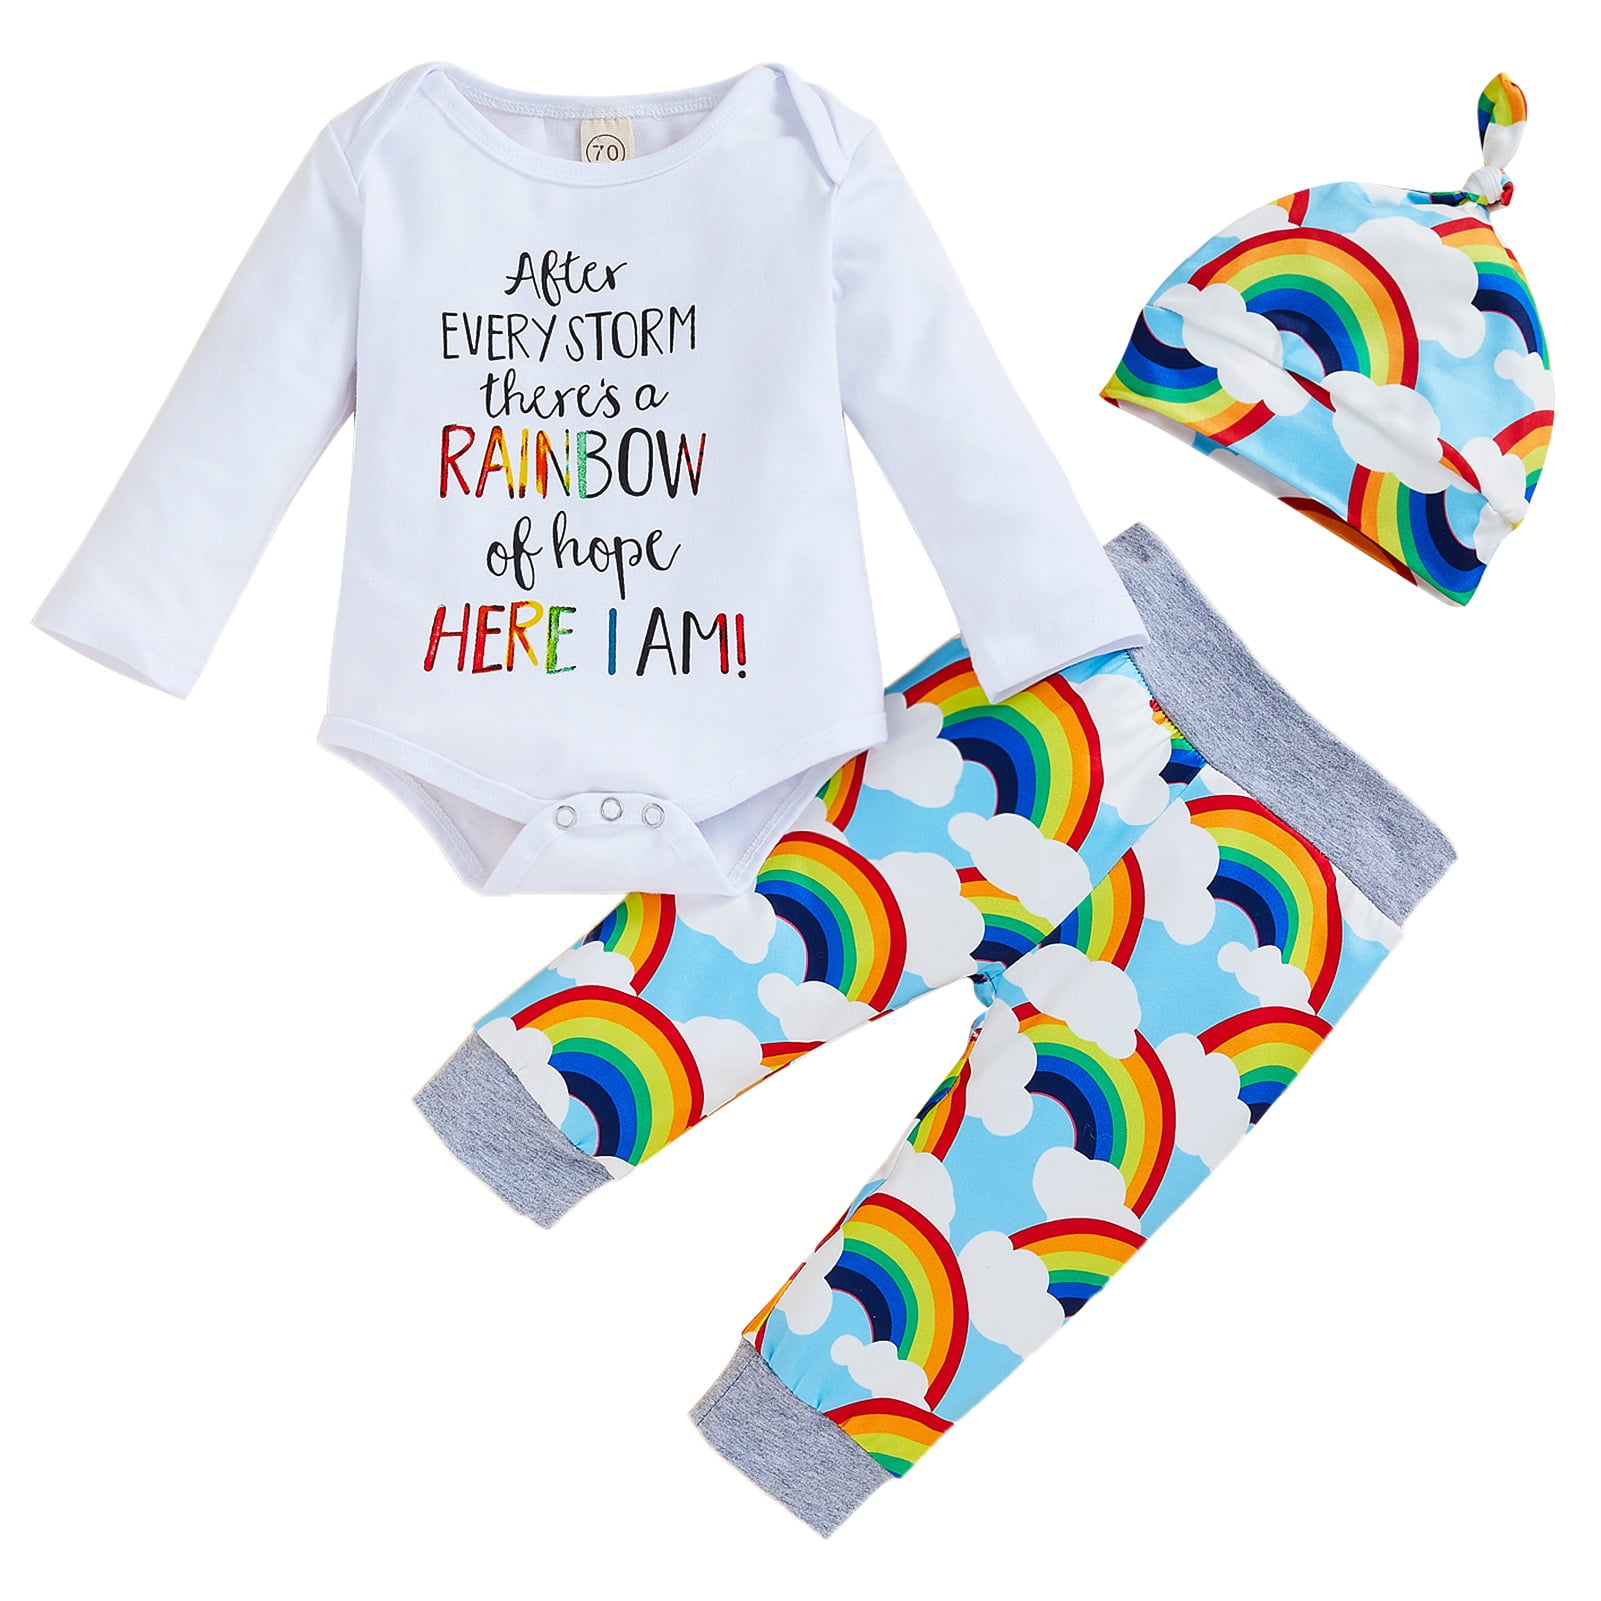 ⭐US Newborn Baby Rainbow Romper Tops Girl Boy Jumpsuit Pants Outfits Clothes Set 